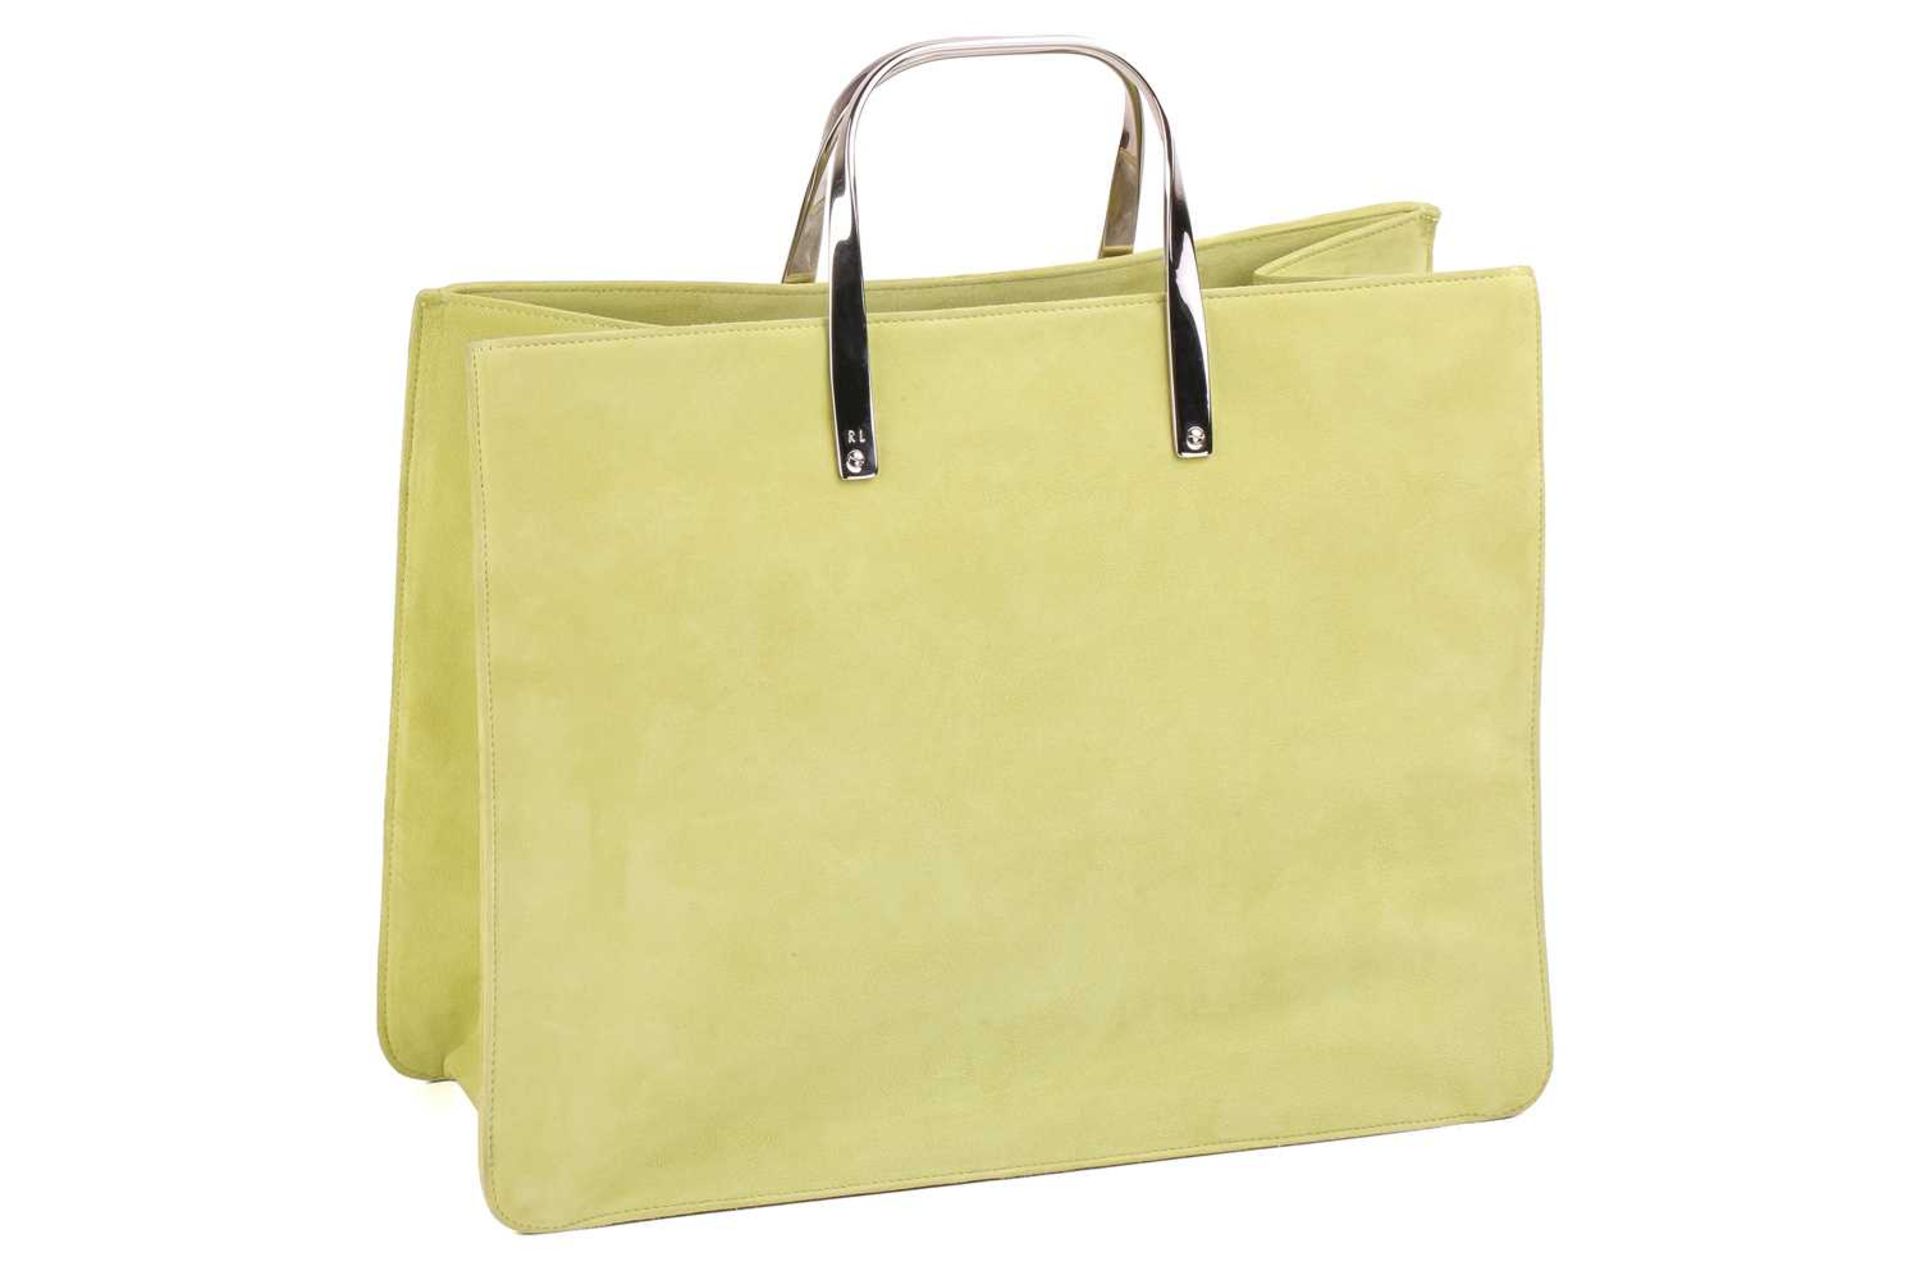 A Ralph Lauren lime green suede tote bag, rectangular body with silver-tone metal top handles.